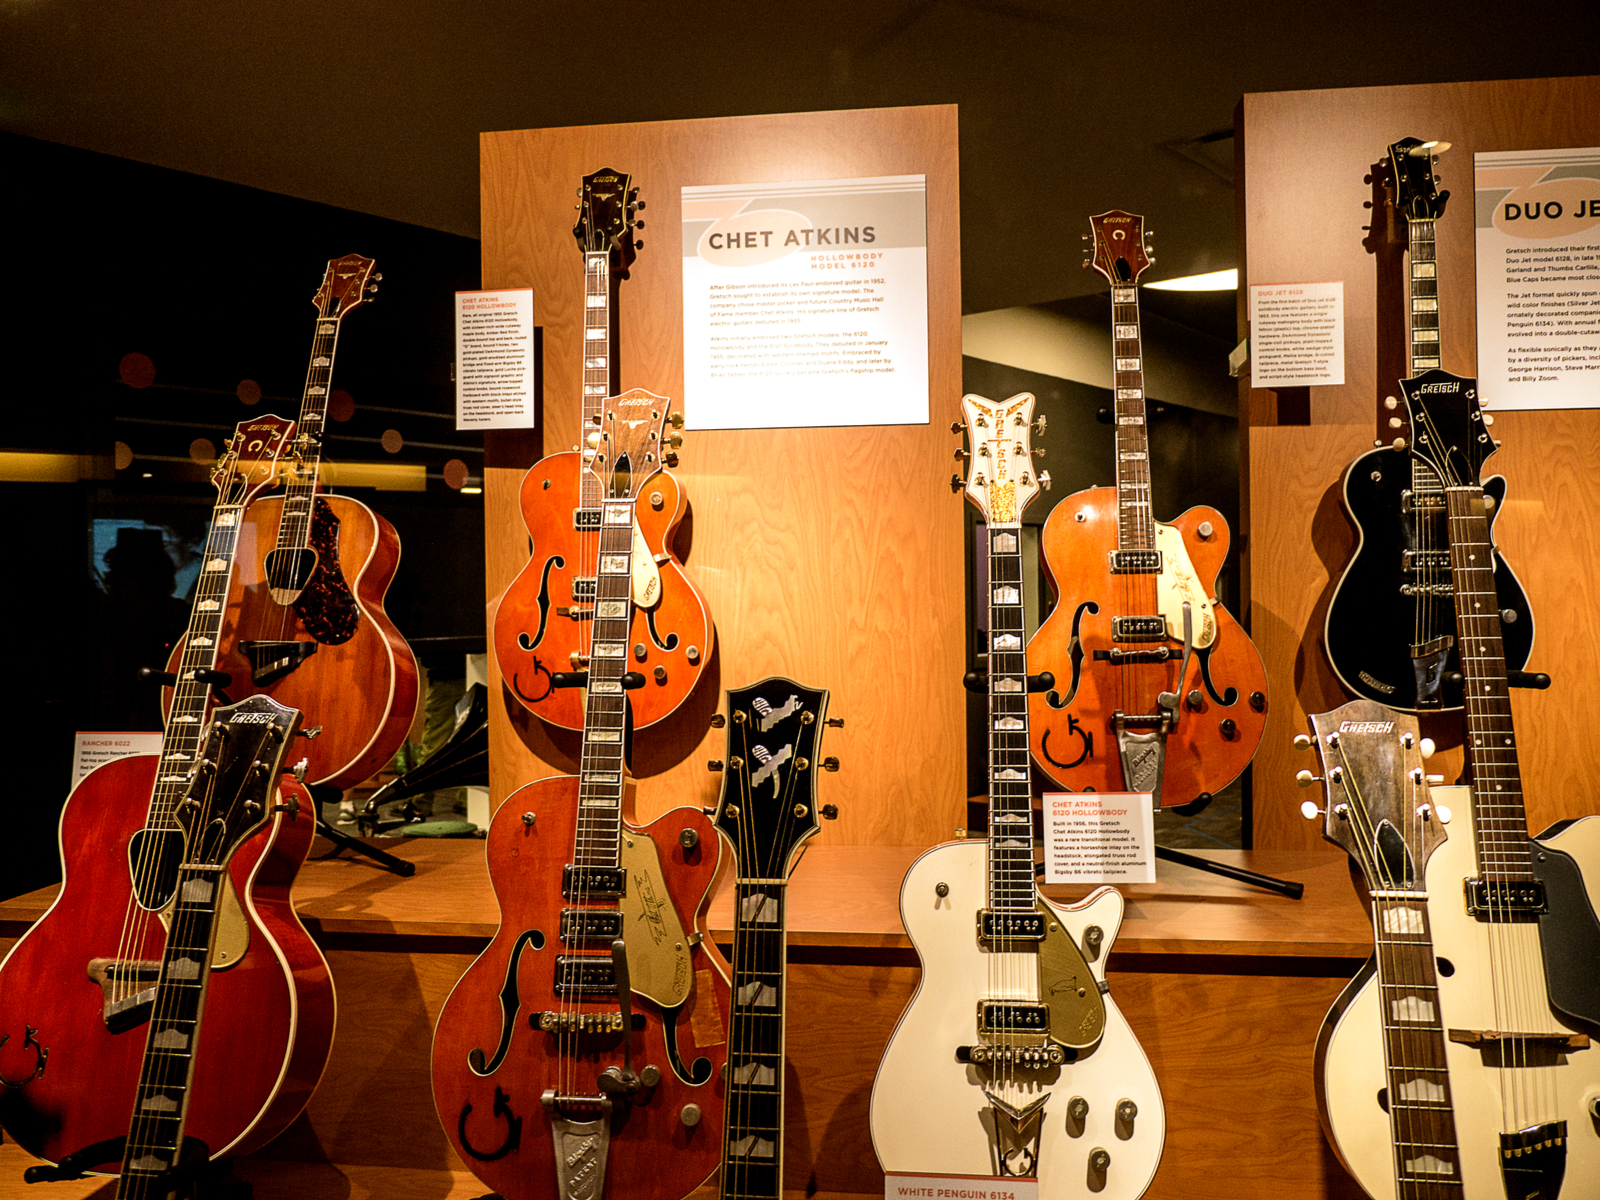 Guitars, used by the renowned American Musician Chet Atkins also know as Mr. Guitar and The Country Gentleman, displayed in The Country Music Hall of Fame which is one of the best things to do in Tennessee